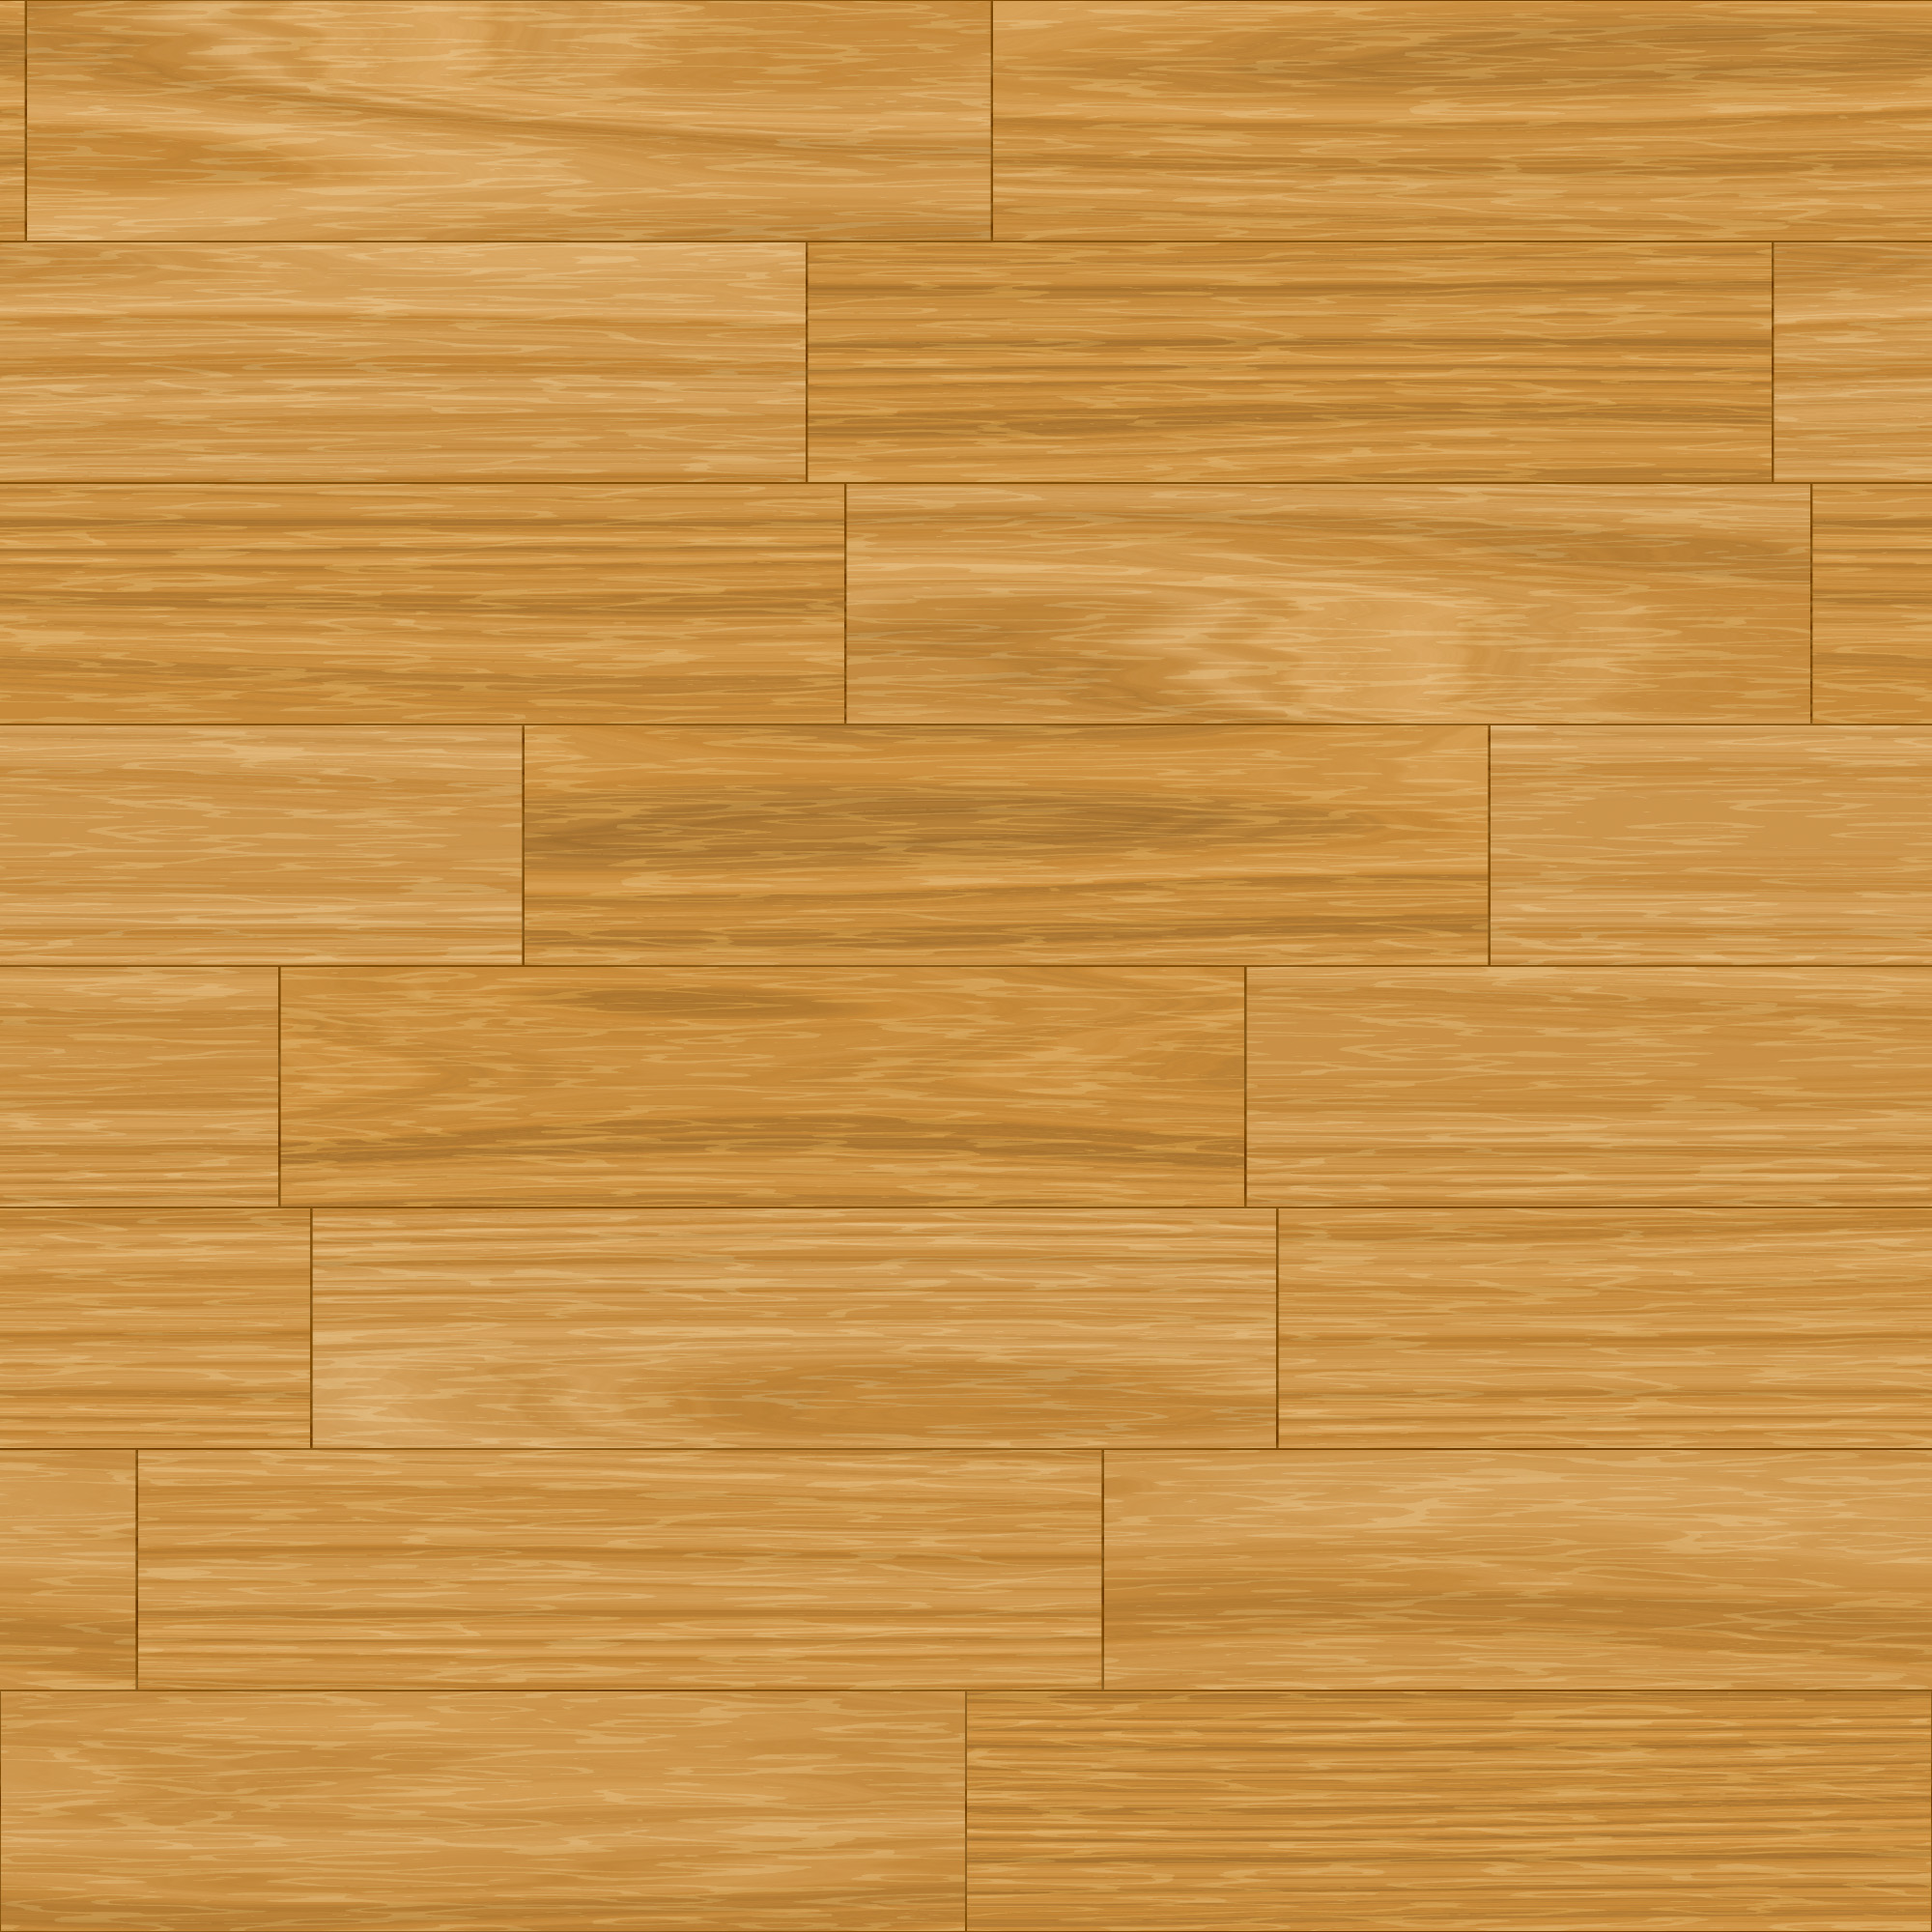 Oak Texture In A Seamless Wood Background